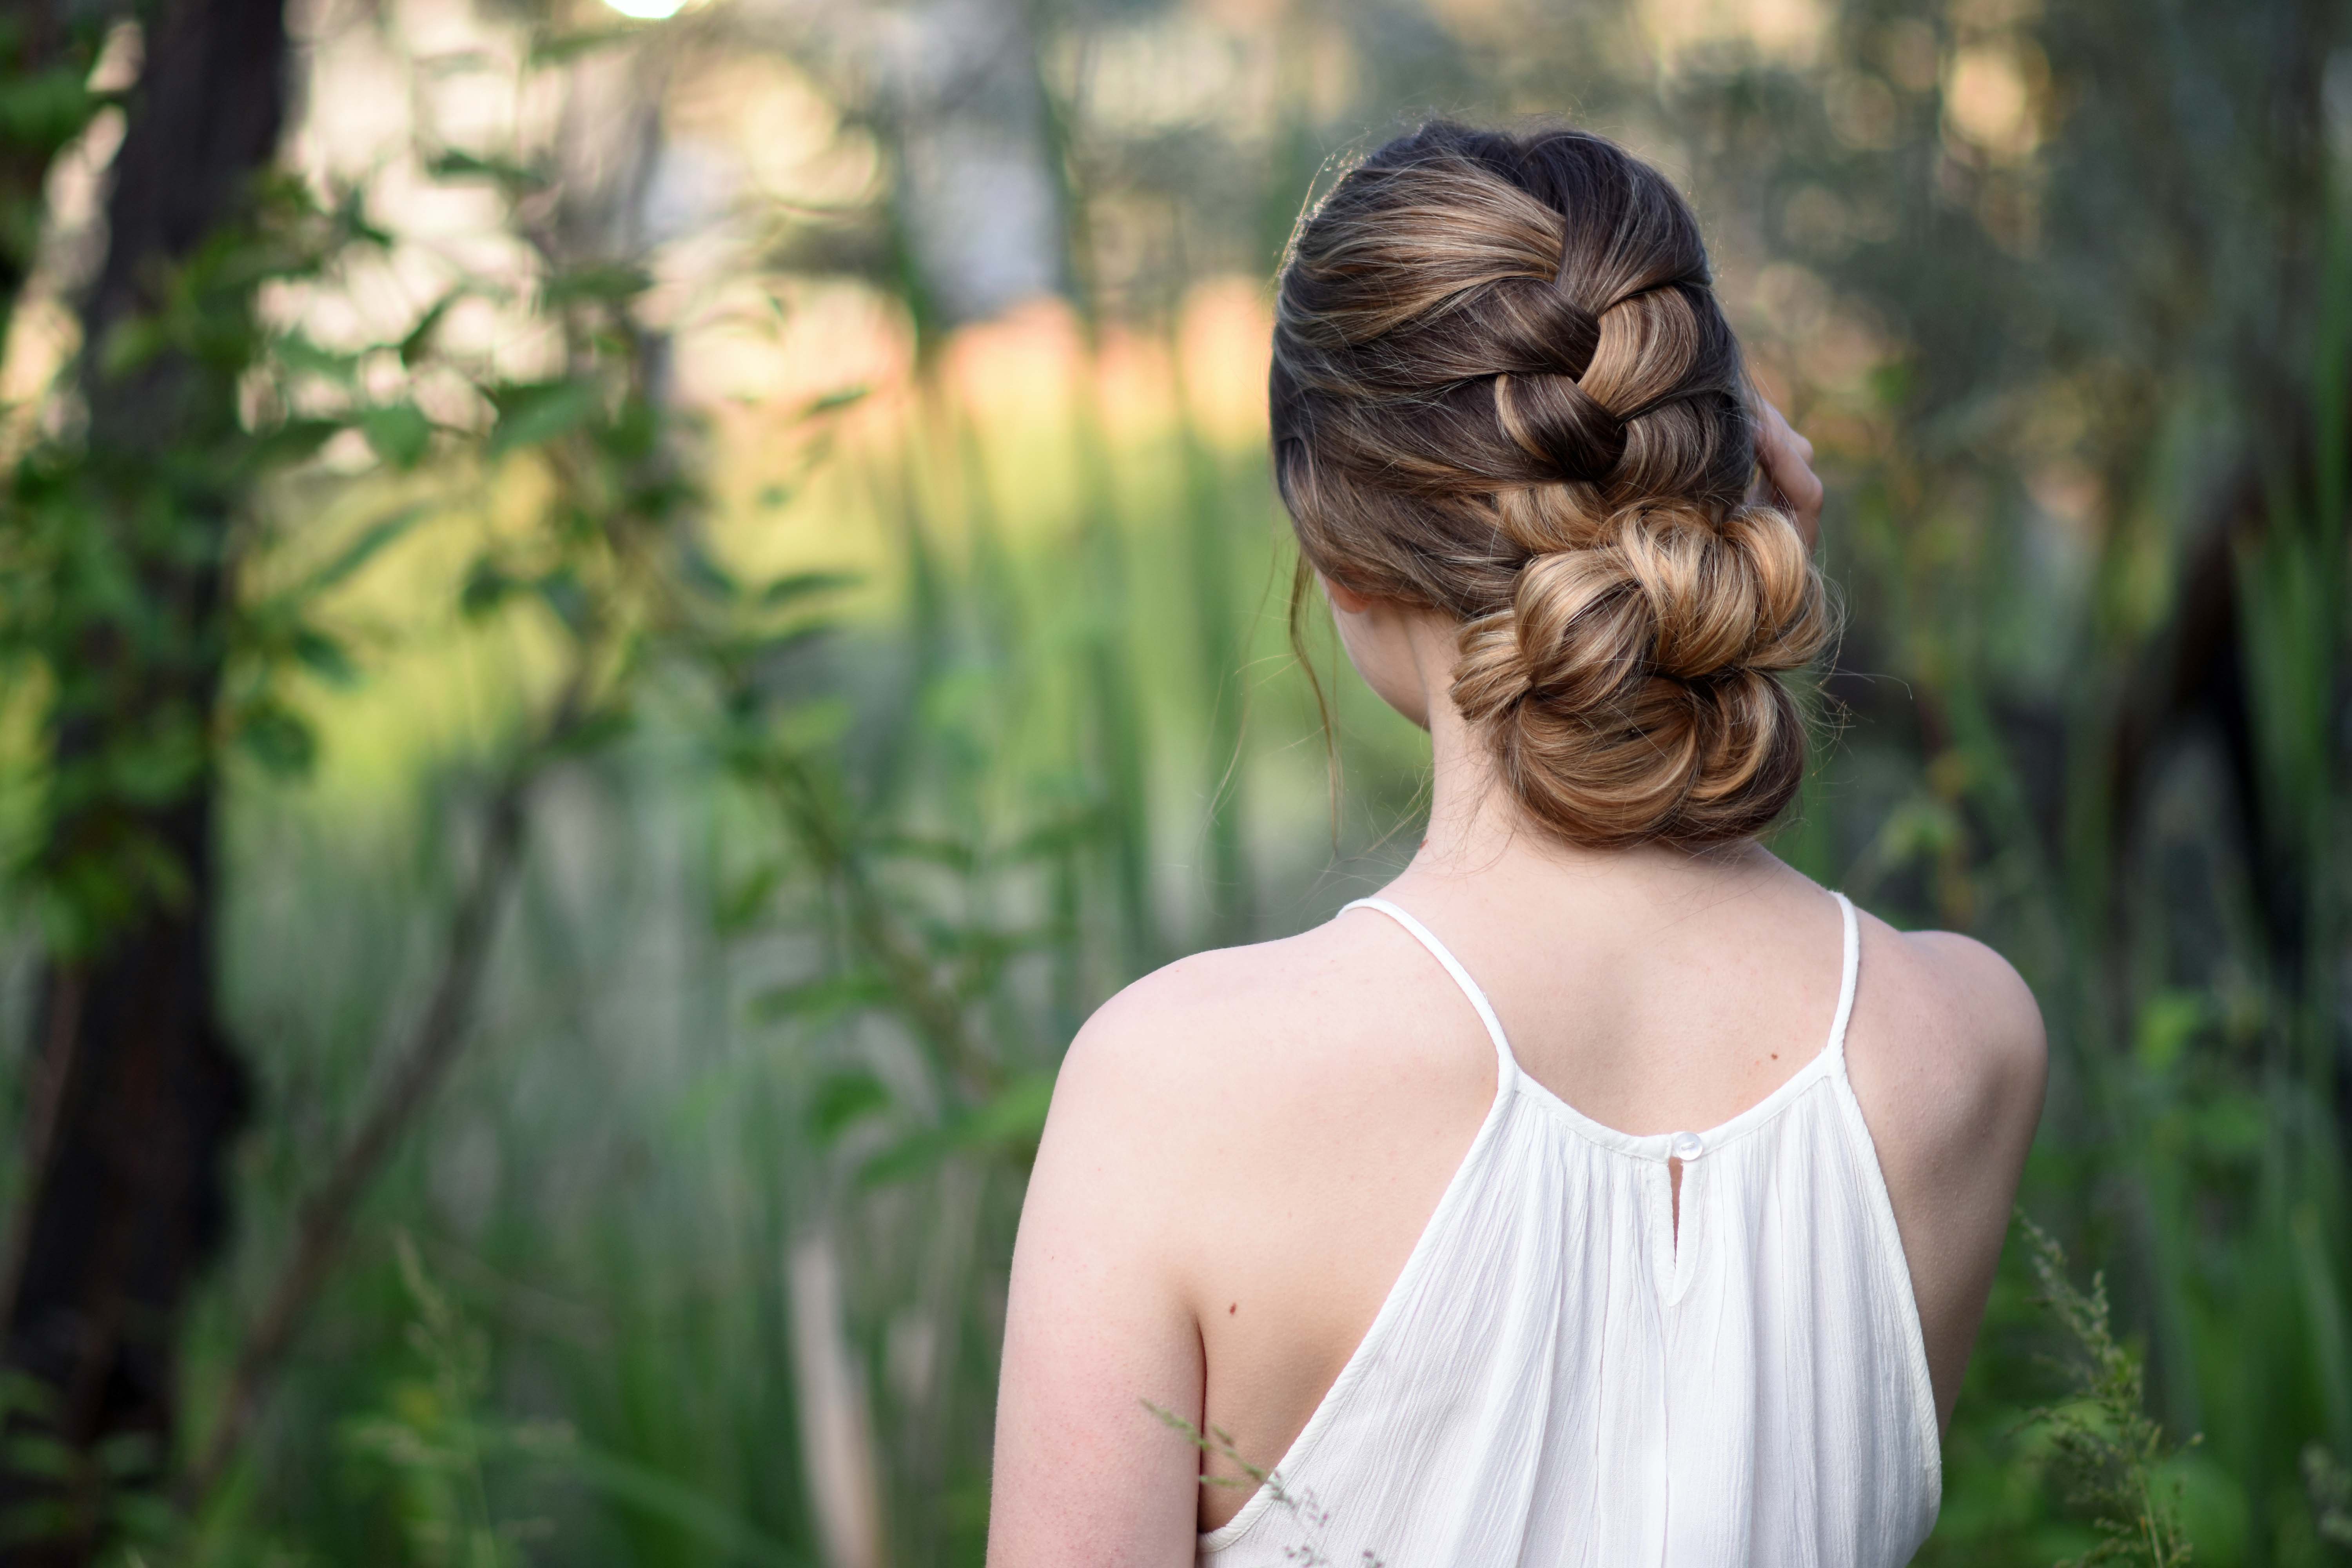 Tips on Washing & Prepping Your Hair Before Getting an Updo | LoveToKnow